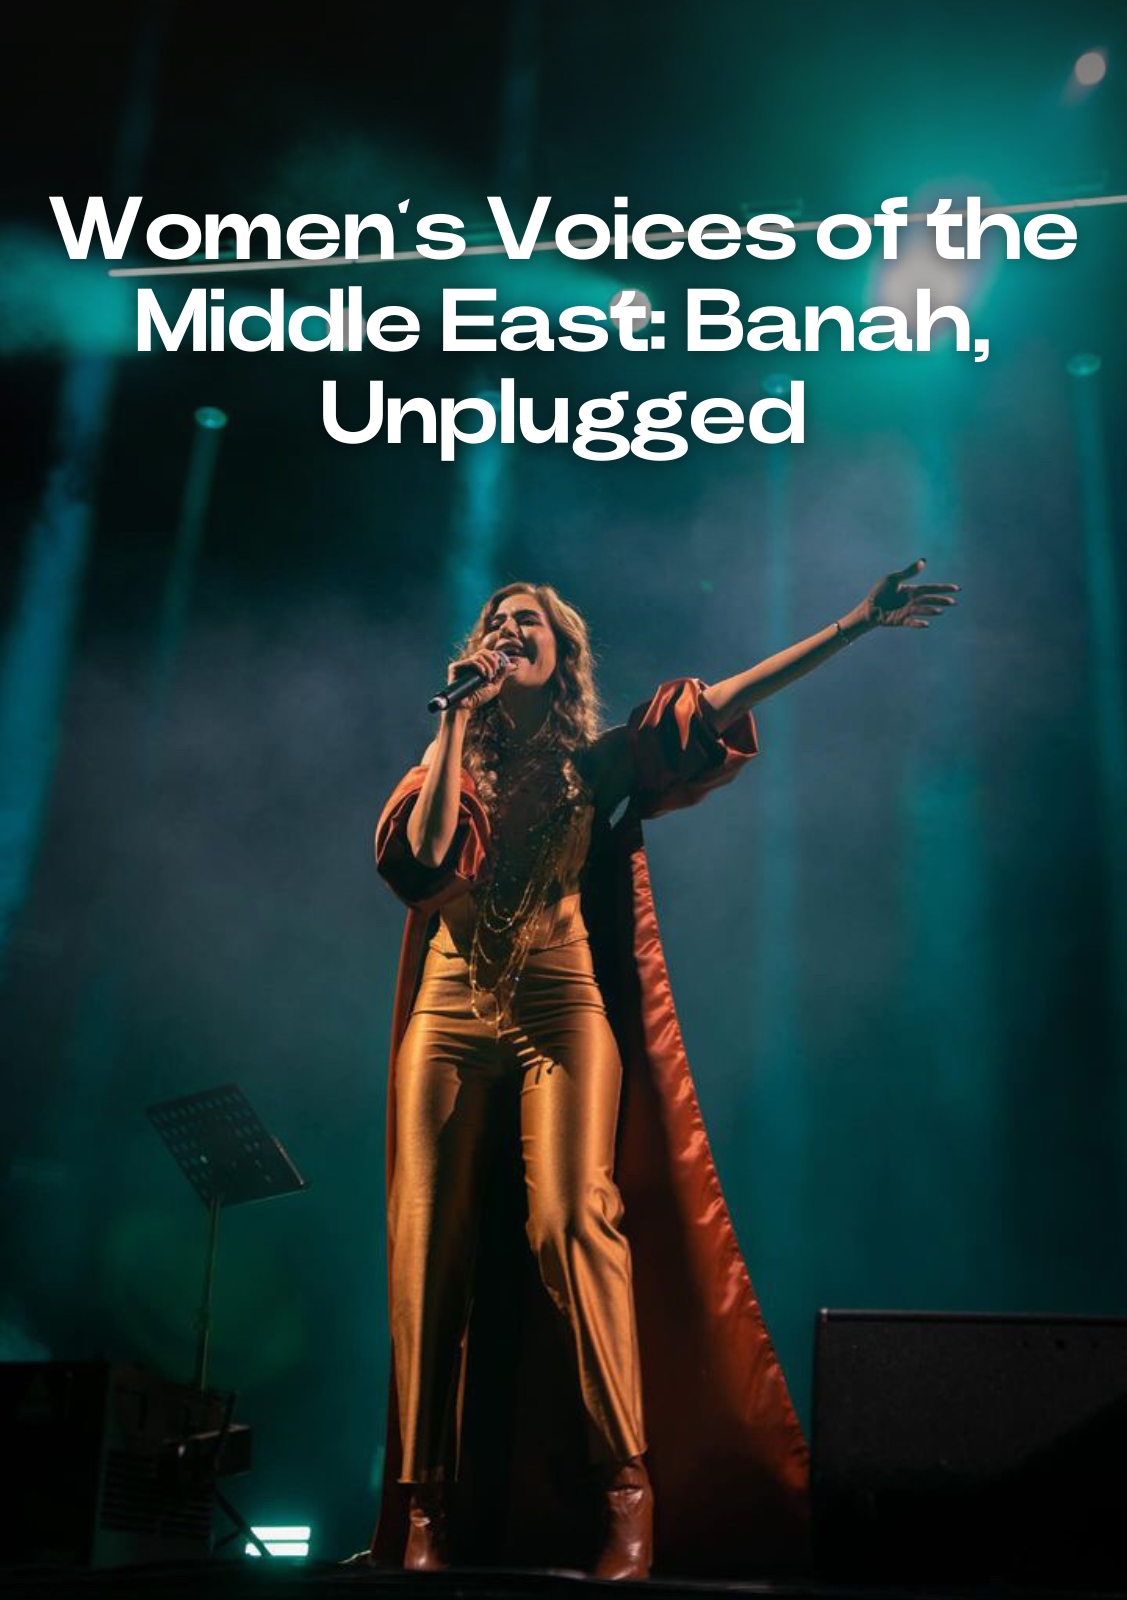 Women’s Voices of the Middle East: Banah, Unplugged